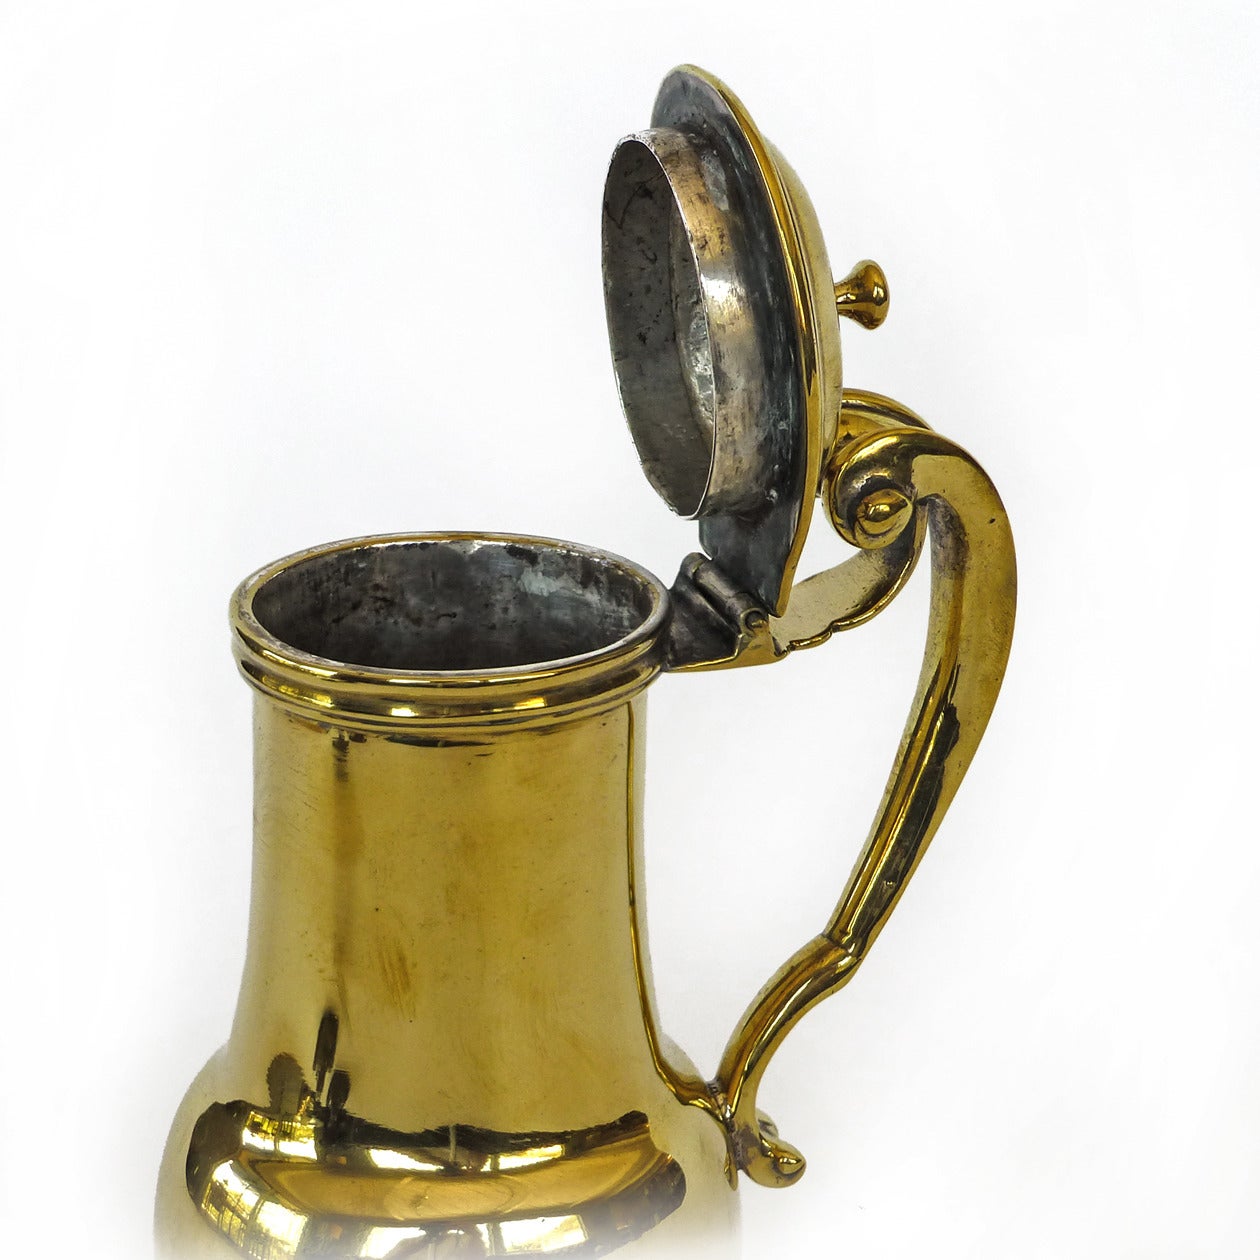 Cast French Brass “Silver Form” Hot Water or Shaving Ewer, circa 1725